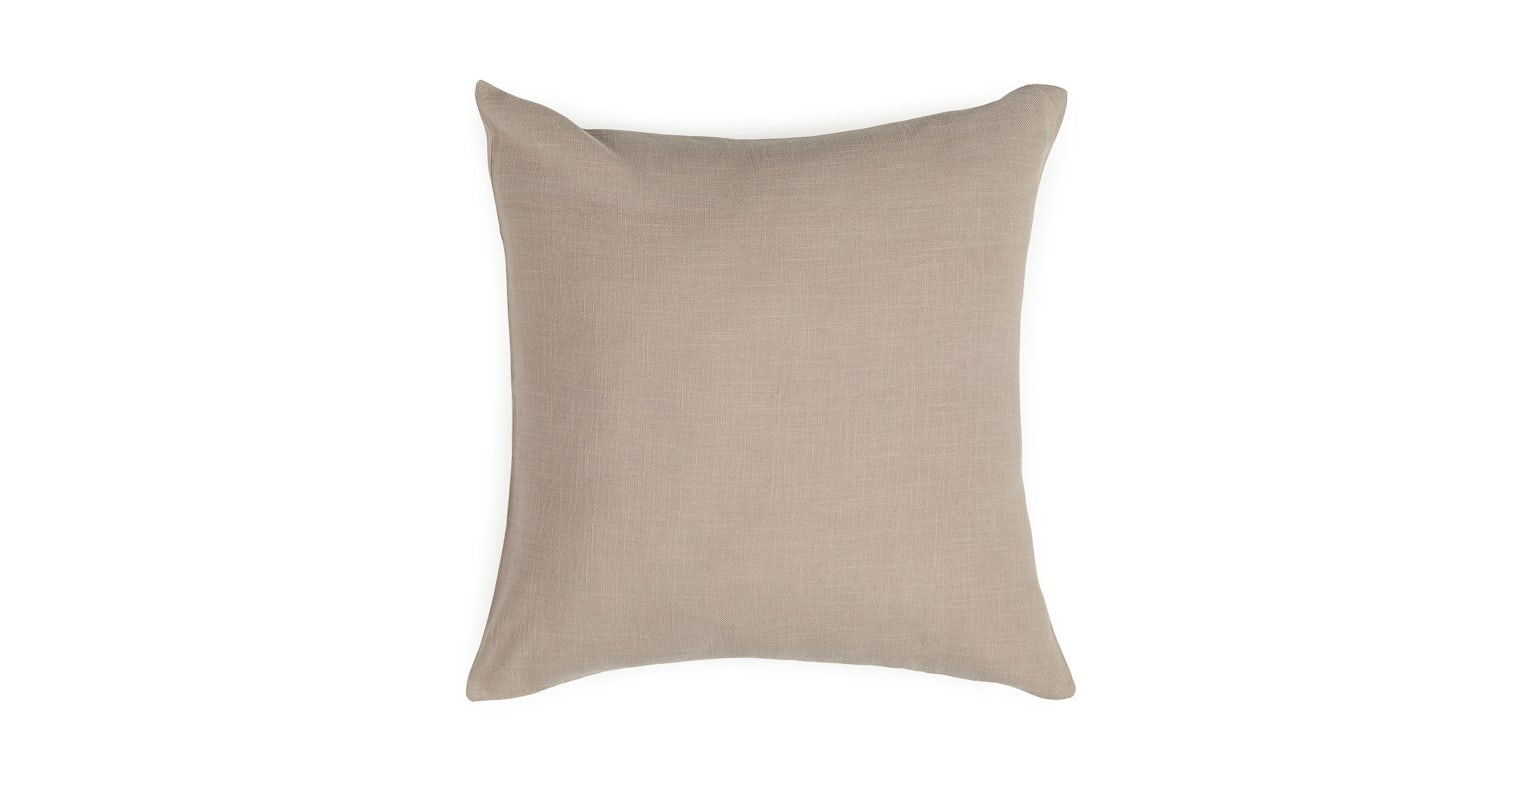 Aleca River Taupe Pillow & Insert | Article